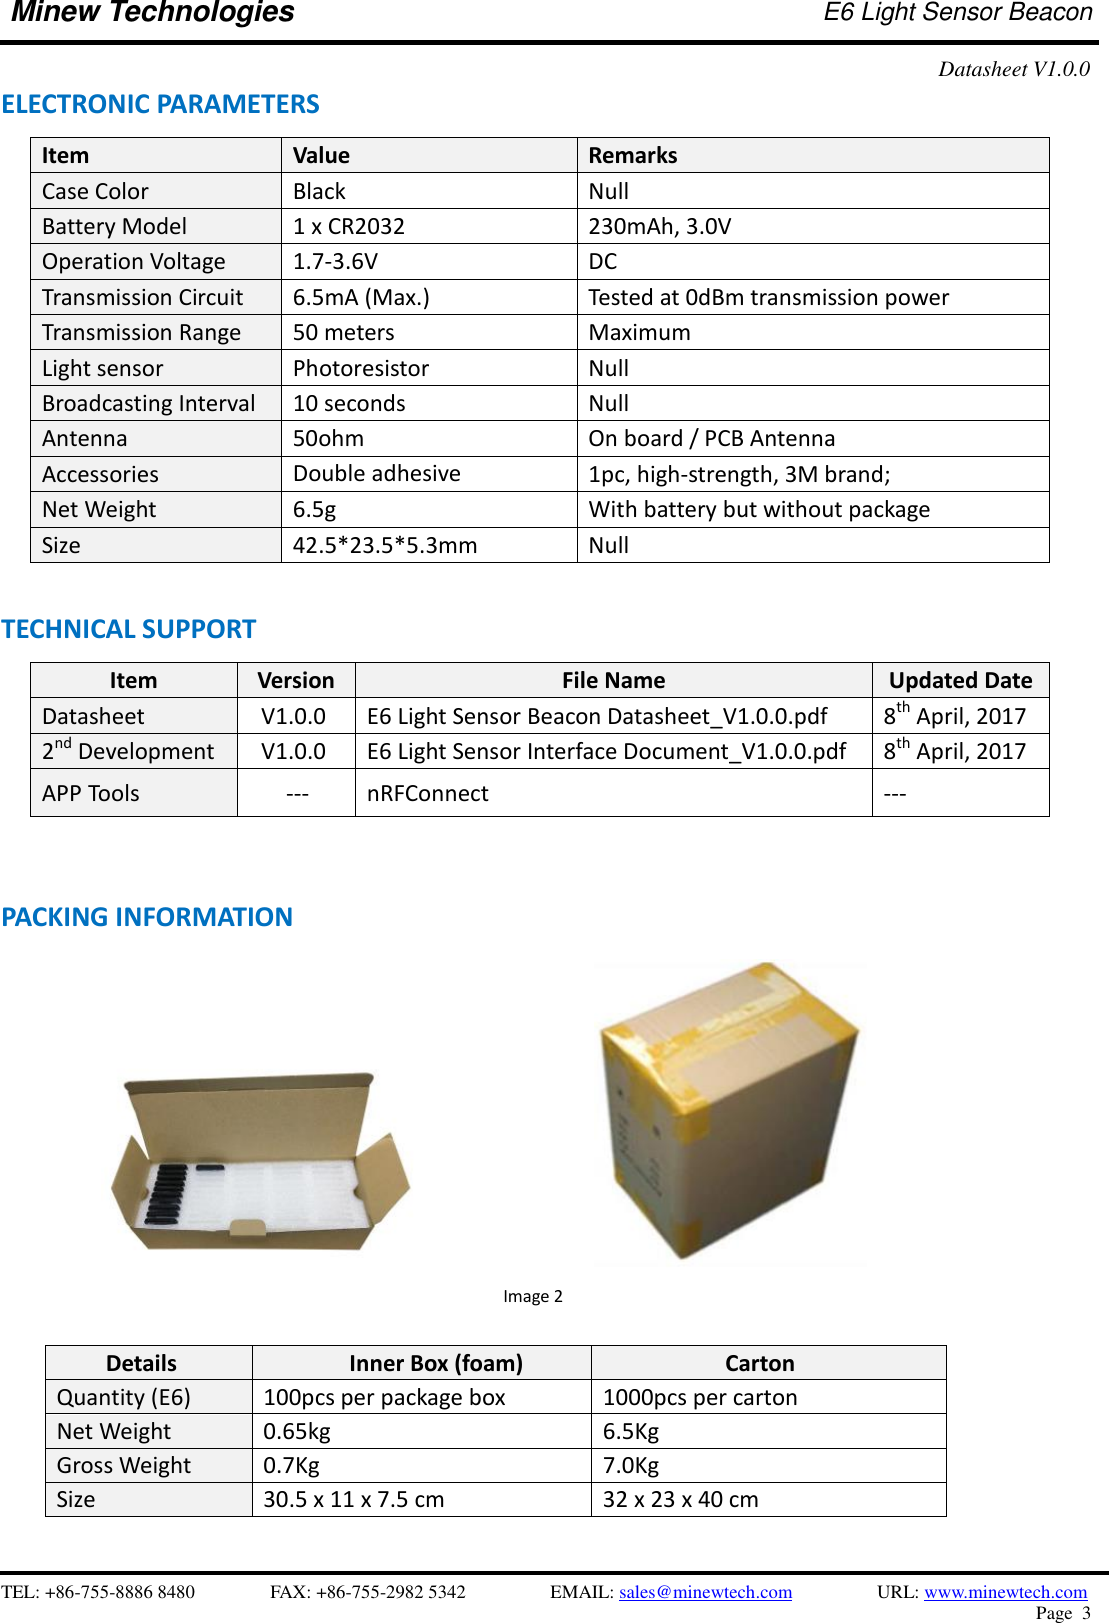    TEL: +86-755-8886 8480              FAX: +86-755-2982 5342              EMAIL: sales@minewtech.com           URL: www.minewtech.com Page  3  Minew Technologies E6 Light Sensor Beacon   Datasheet V1.0.0   ELECTRONIC PARAMETERS Item   Value Remarks Case Color Black Null Battery Model 1 x CR2032 230mAh, 3.0V Operation Voltage 1.7-3.6V DC Transmission Circuit 6.5mA (Max.) Tested at 0dBm transmission power Transmission Range 50 meters Maximum Light sensor Photoresistor Null Broadcasting Interval 10 seconds Null Antenna 50ohm On board / PCB Antenna Accessories Double adhesive   1pc, high-strength, 3M brand; Net Weight 6.5g With battery but without package Size 42.5*23.5*5.3mm Null  TECHNICAL SUPPORT Item Version File Name Updated Date Datasheet V1.0.0 E6 Light Sensor Beacon Datasheet_V1.0.0.pdf 8th April, 2017 2nd Development V1.0.0 E6 Light Sensor Interface Document_V1.0.0.pdf 8th April, 2017 APP Tools    --- nRFConnect ---      PACKING INFORMATION                                                                      Image 2  Details Inner Box (foam) Carton Quantity (E6) 100pcs per package box 1000pcs per carton Net Weight 0.65kg 6.5Kg Gross Weight 0.7Kg 7.0Kg Size 30.5 x 11 x 7.5 cm 32 x 23 x 40 cm  